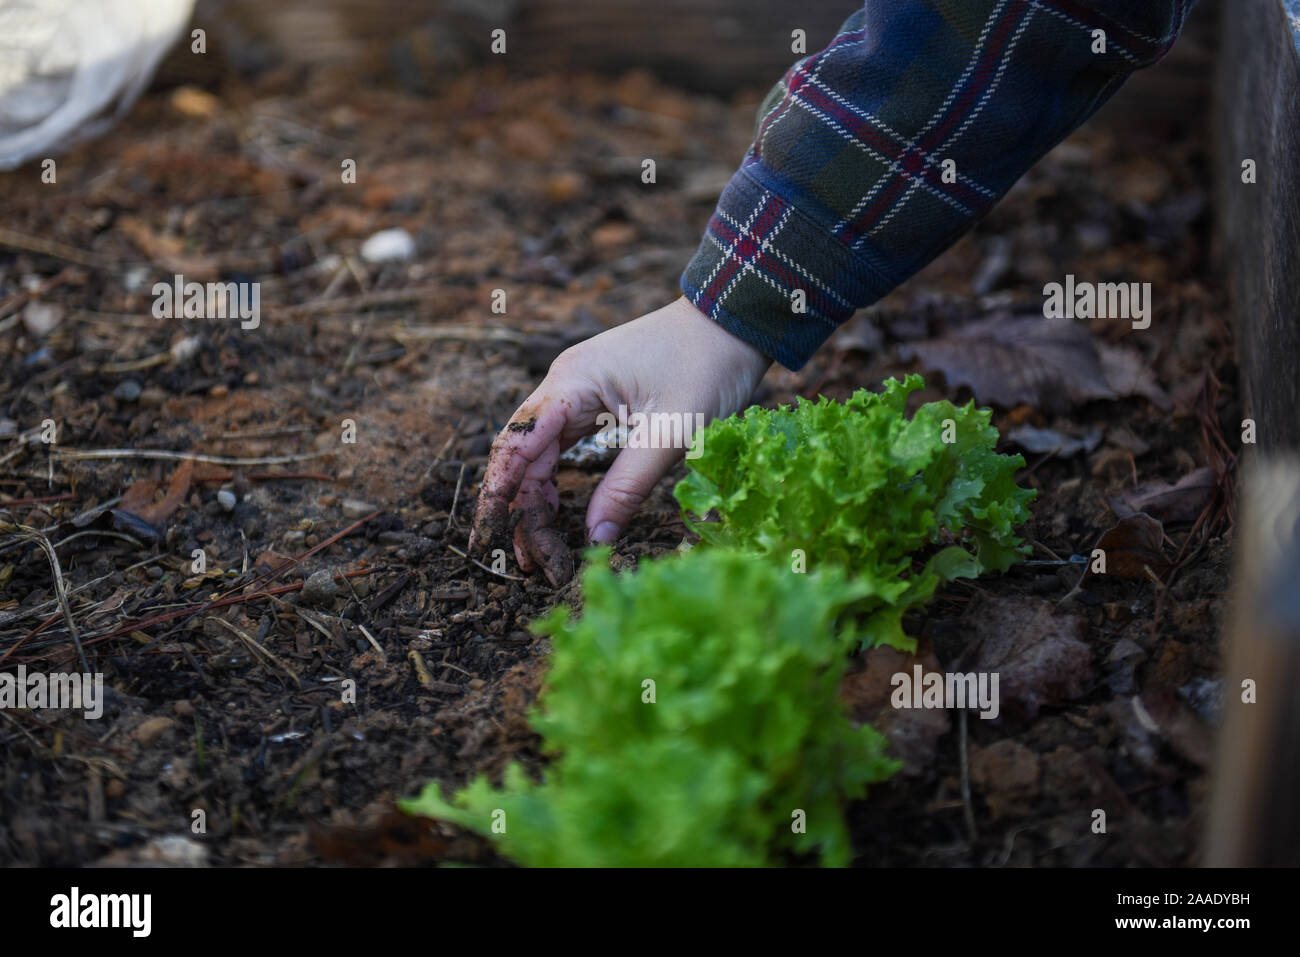 Winter gardening photos in a local garden focused on sustainability and food security in the community. Stock Photo